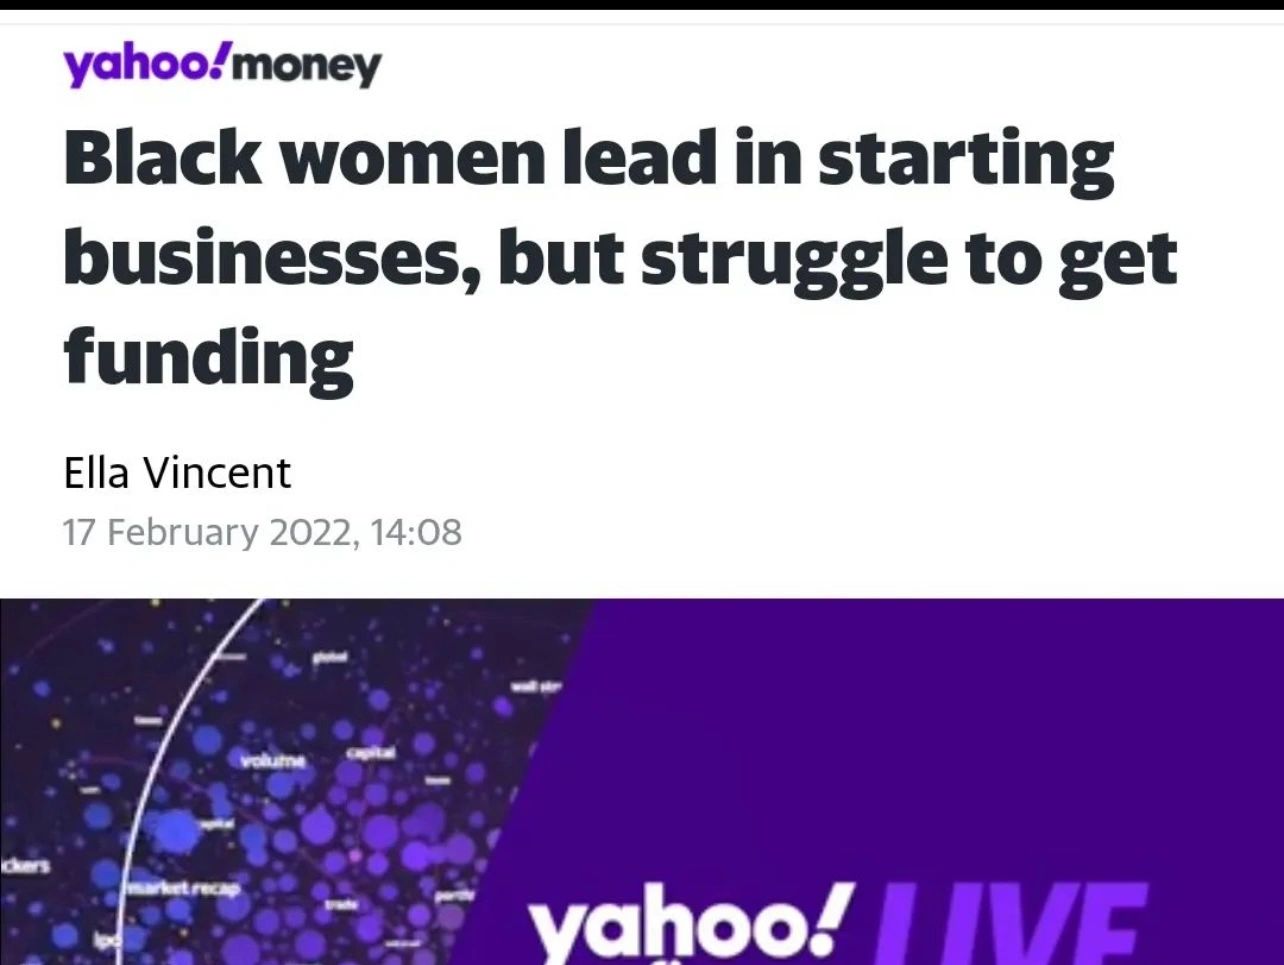 We’re so excited for our latest feature in @YahooFinance in hopes to raise more awareness about the 